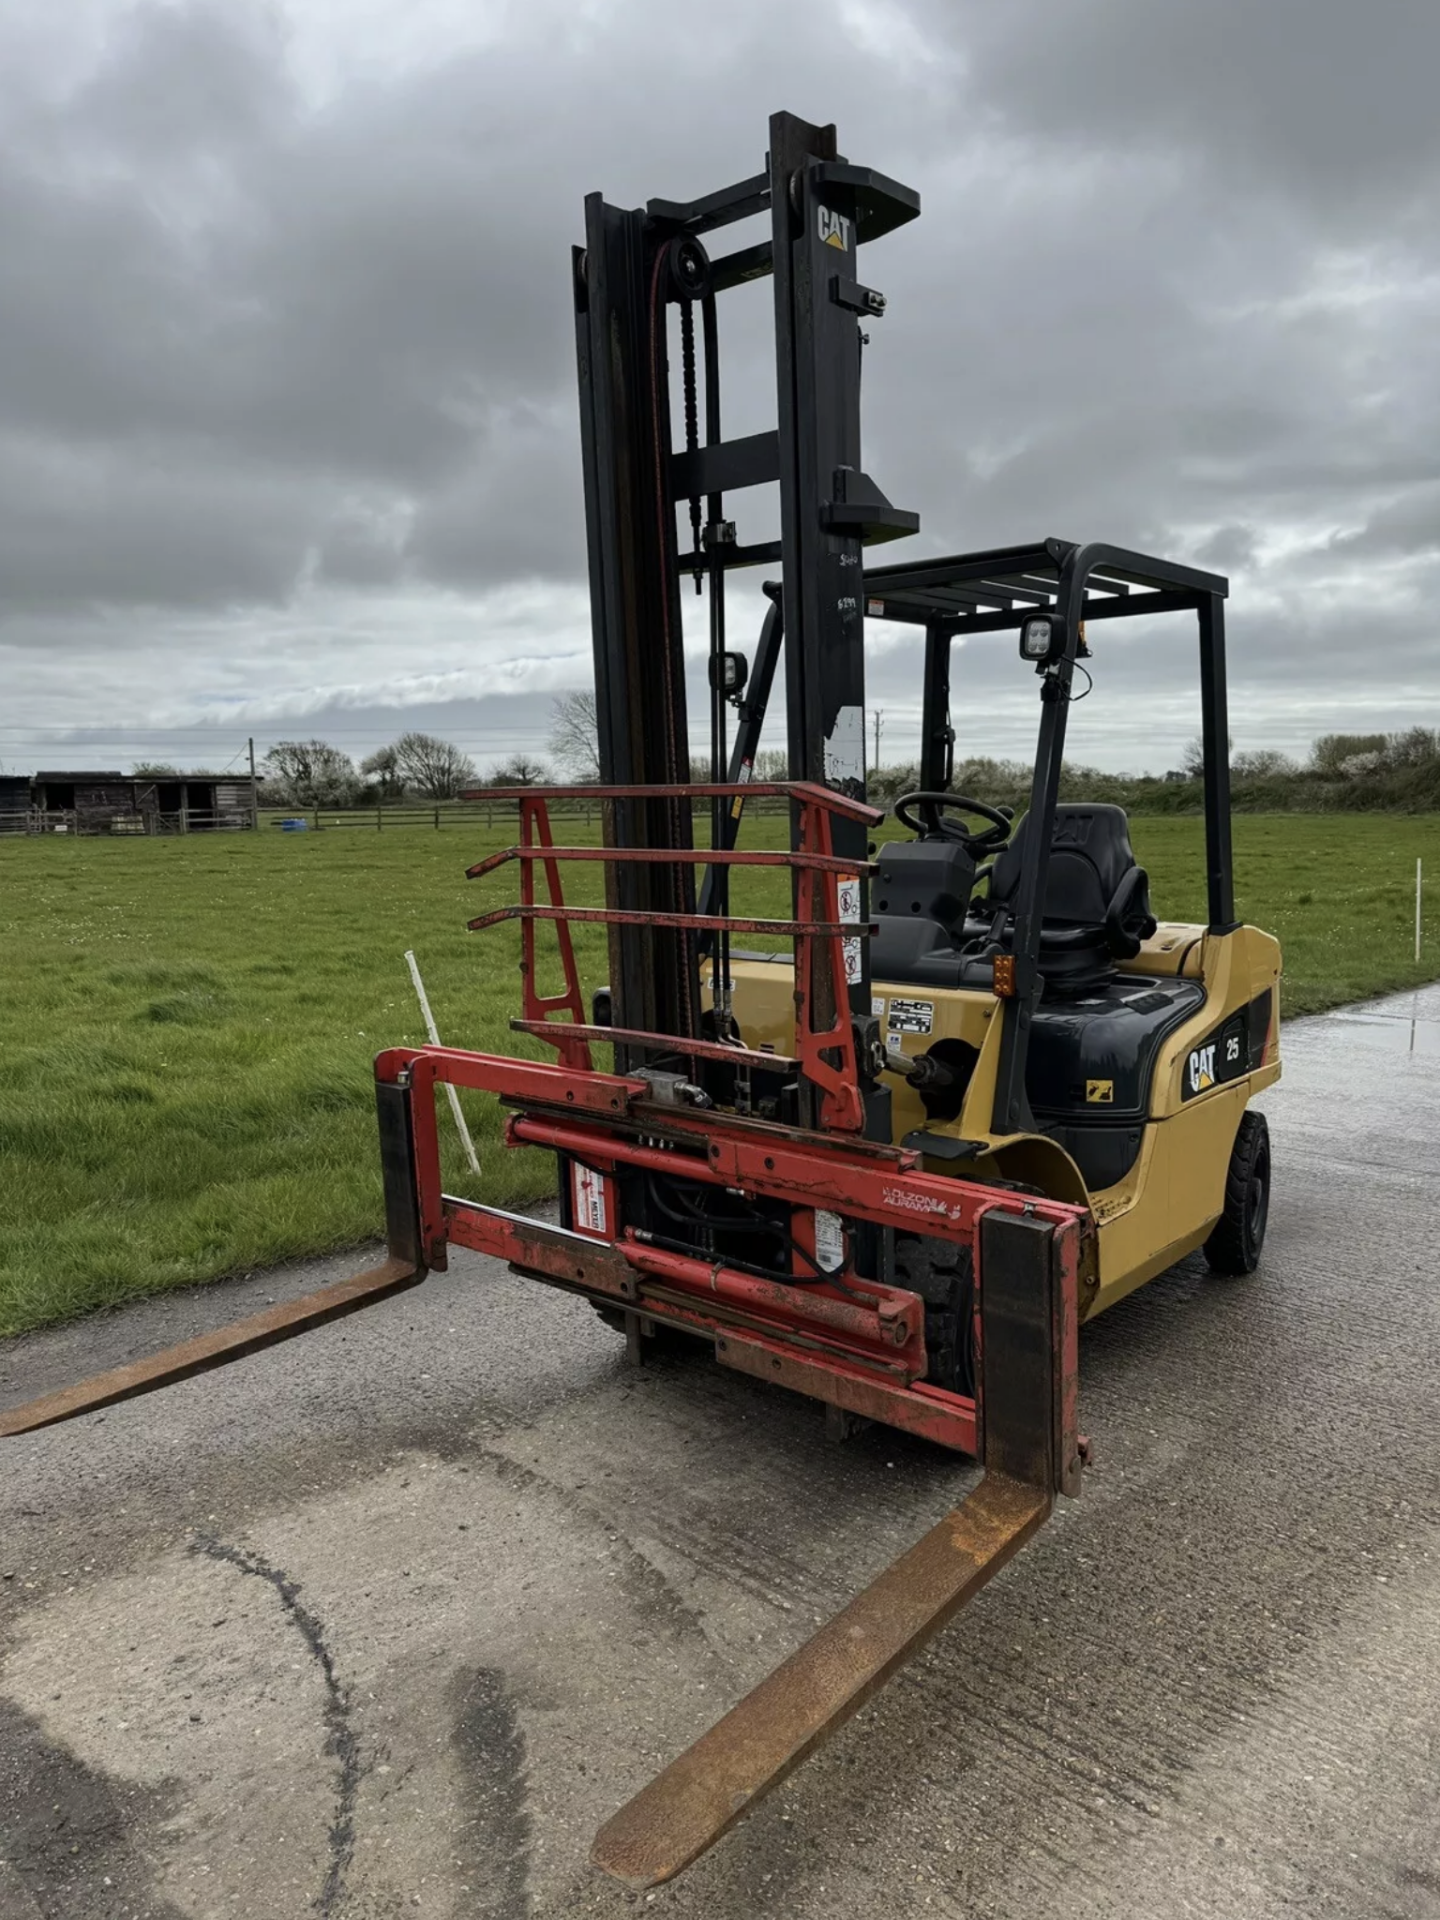 CATERPILLAR, 2.5 Tonne Diesel Forklift - 2500 Hours From New) with fork spreader - Image 3 of 9